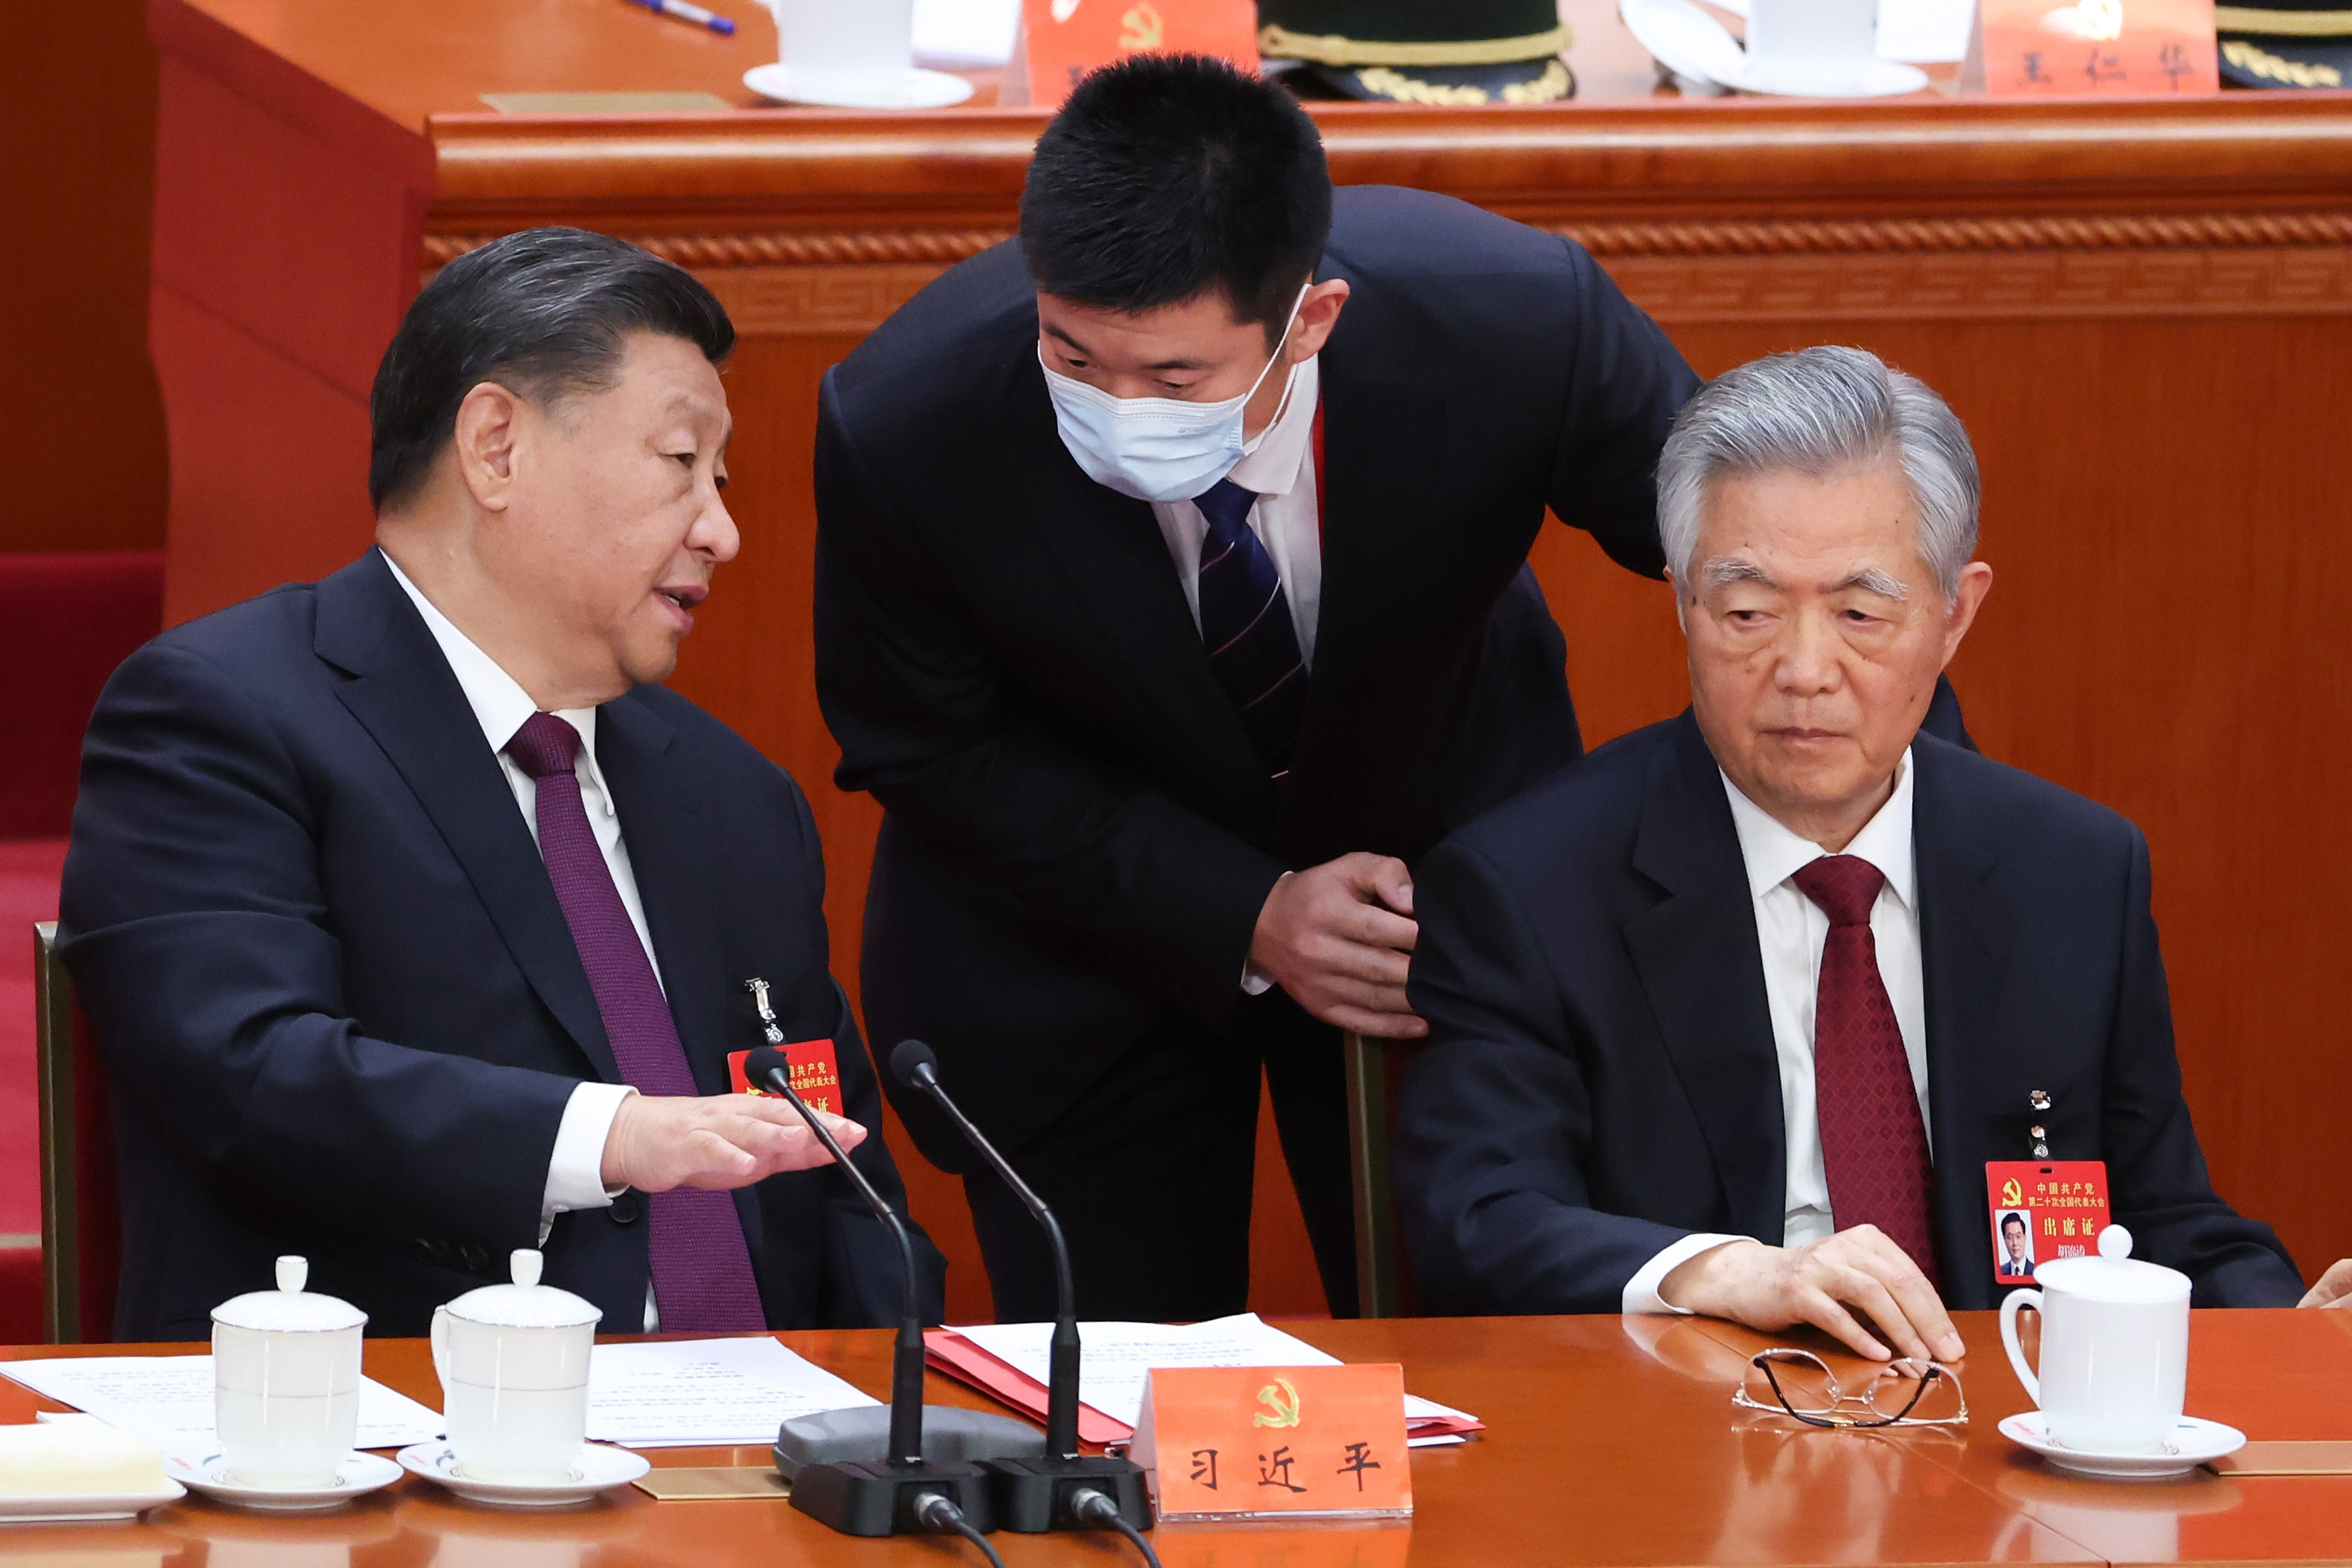 xi-jinping-s-predecessor-being-led-out-of-party-congress-divides-internet